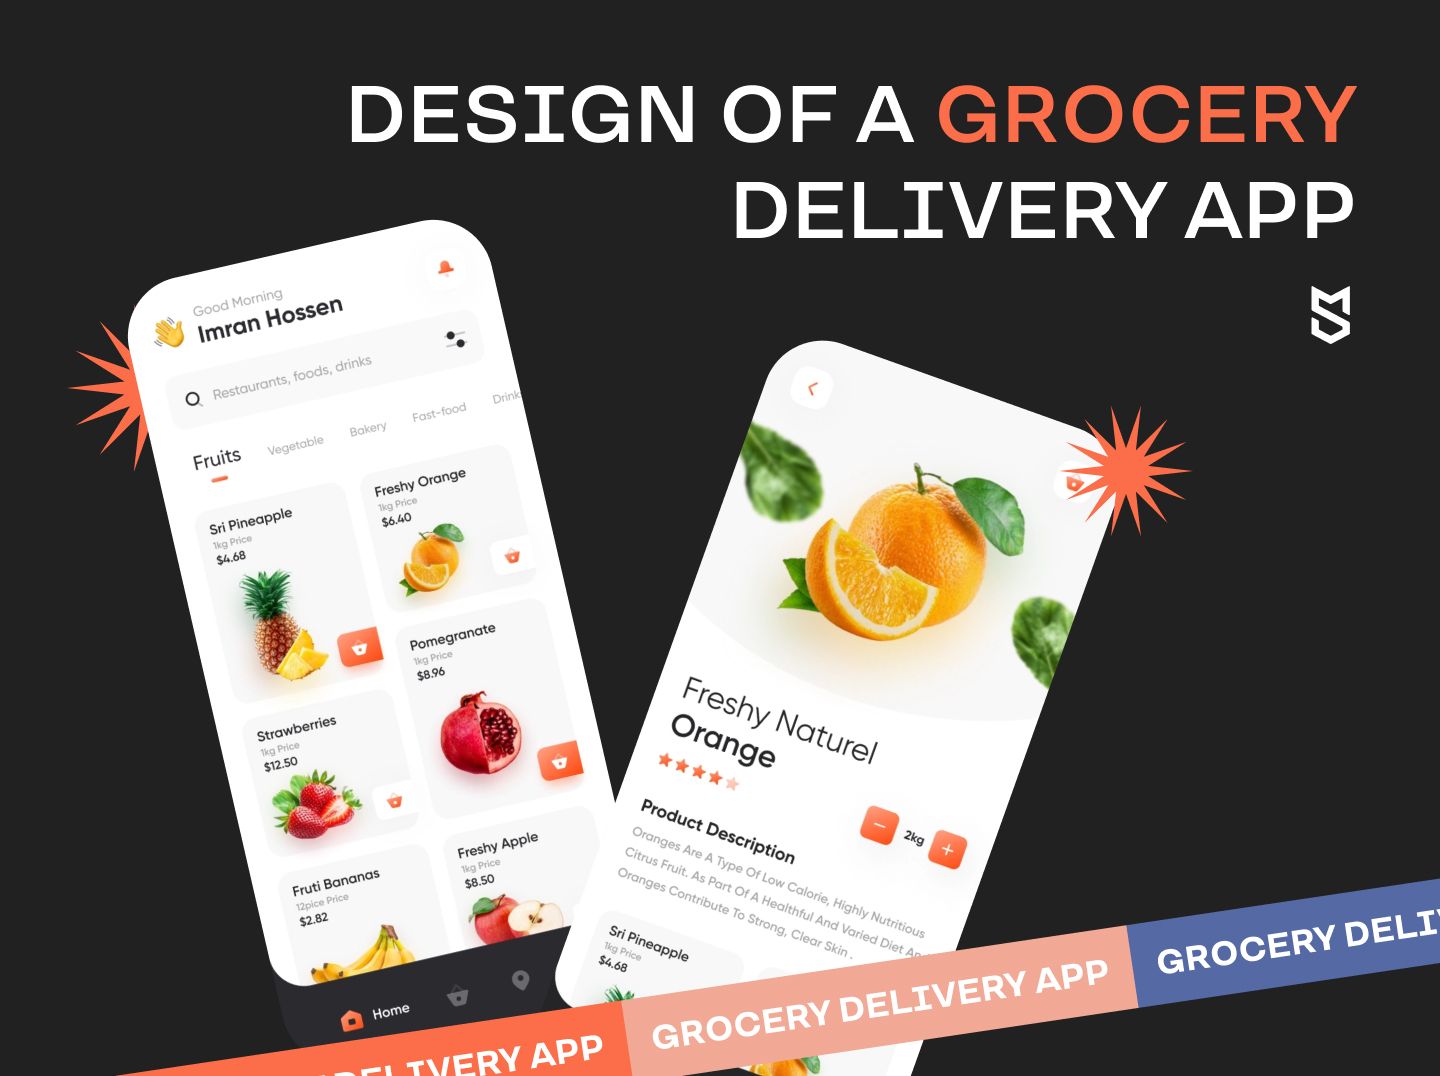 Design of a grocery delivery app